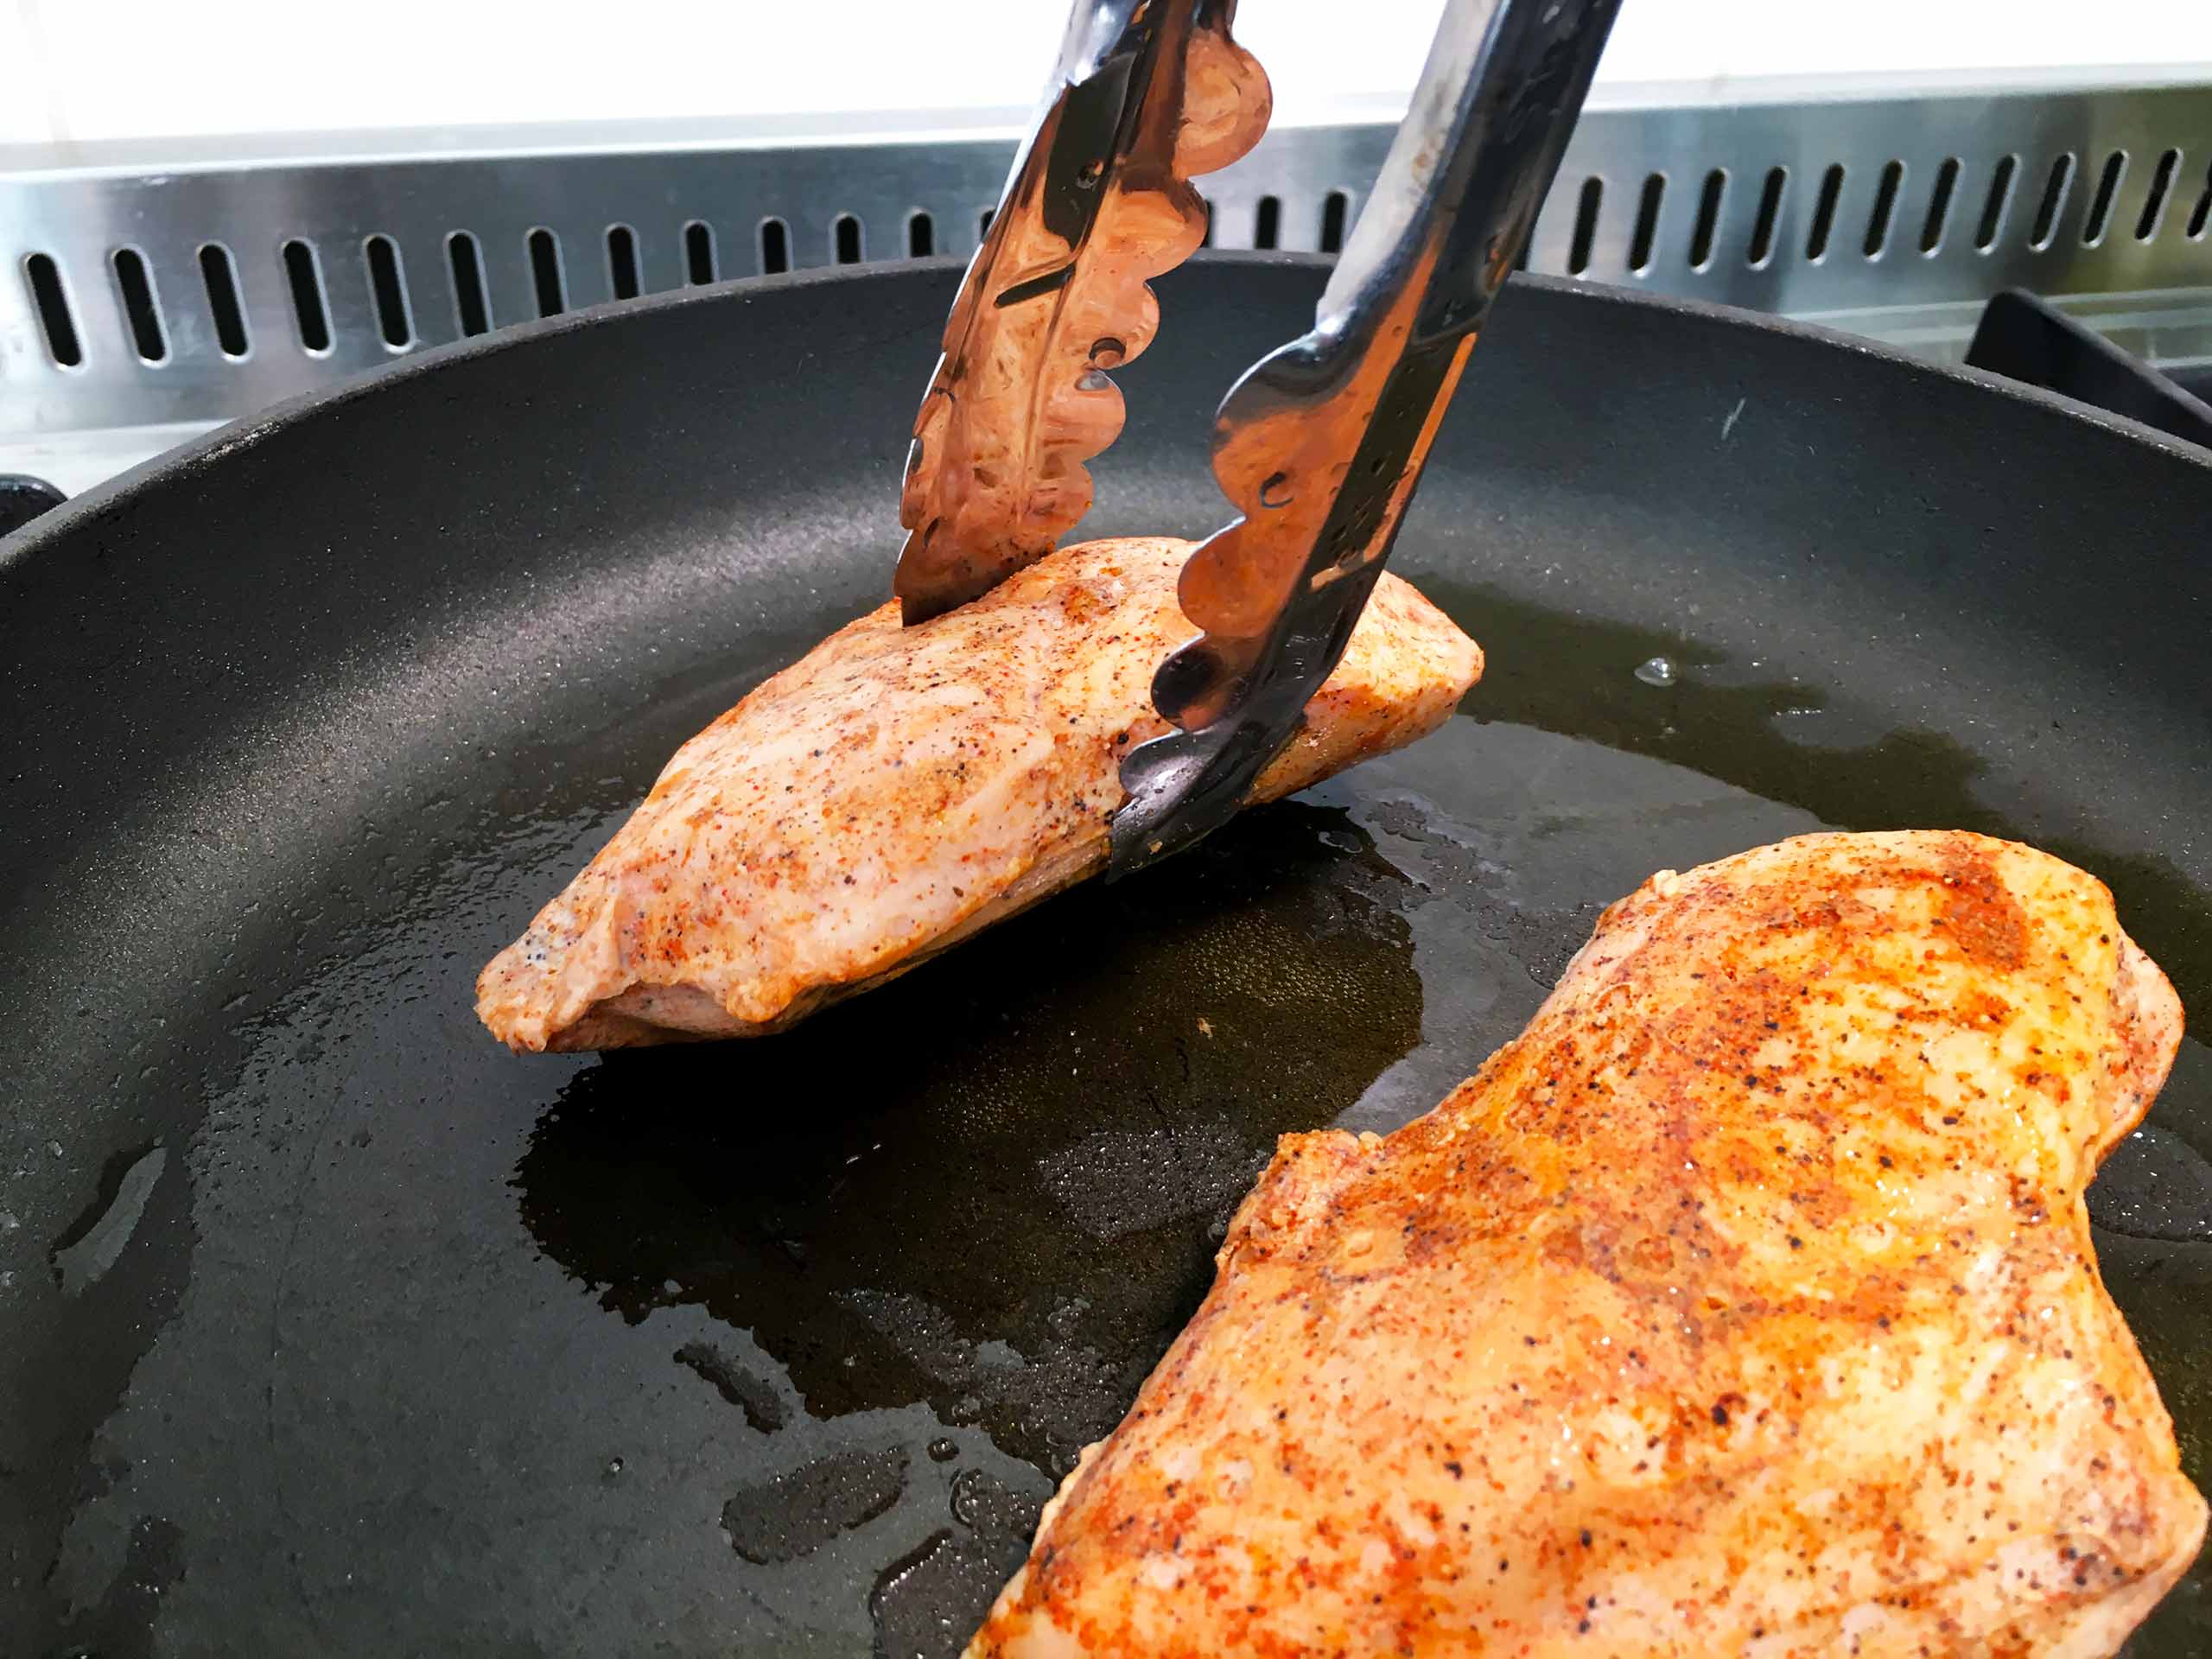 Since the surface of the chicken breast is not straight it is best to use tweezers to tilt the chicken breast so all of it sides will get a nice sear.